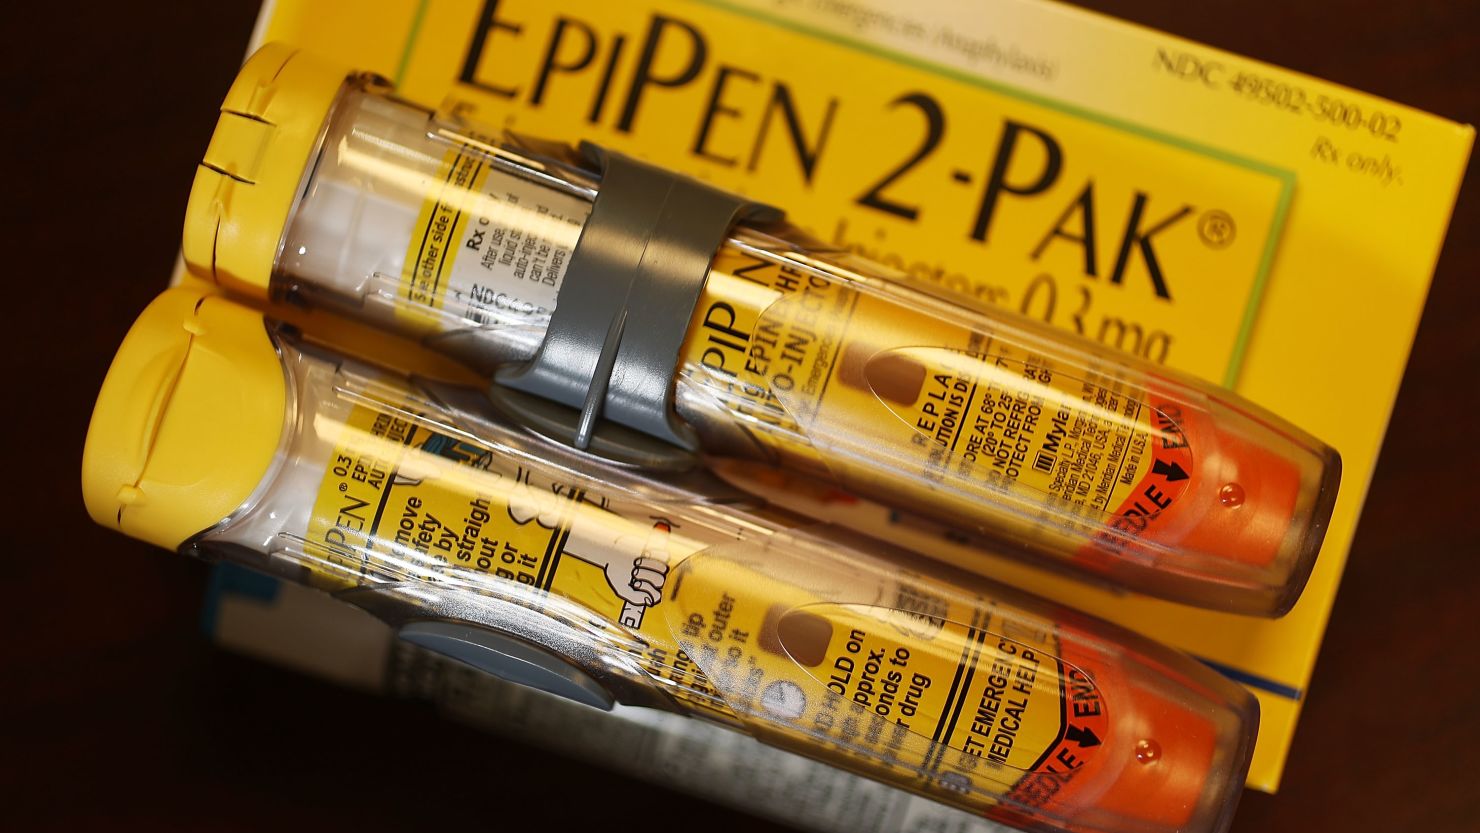 EipPens give an emergency injection of epinephrine to treat life-threatening allergic reactions.